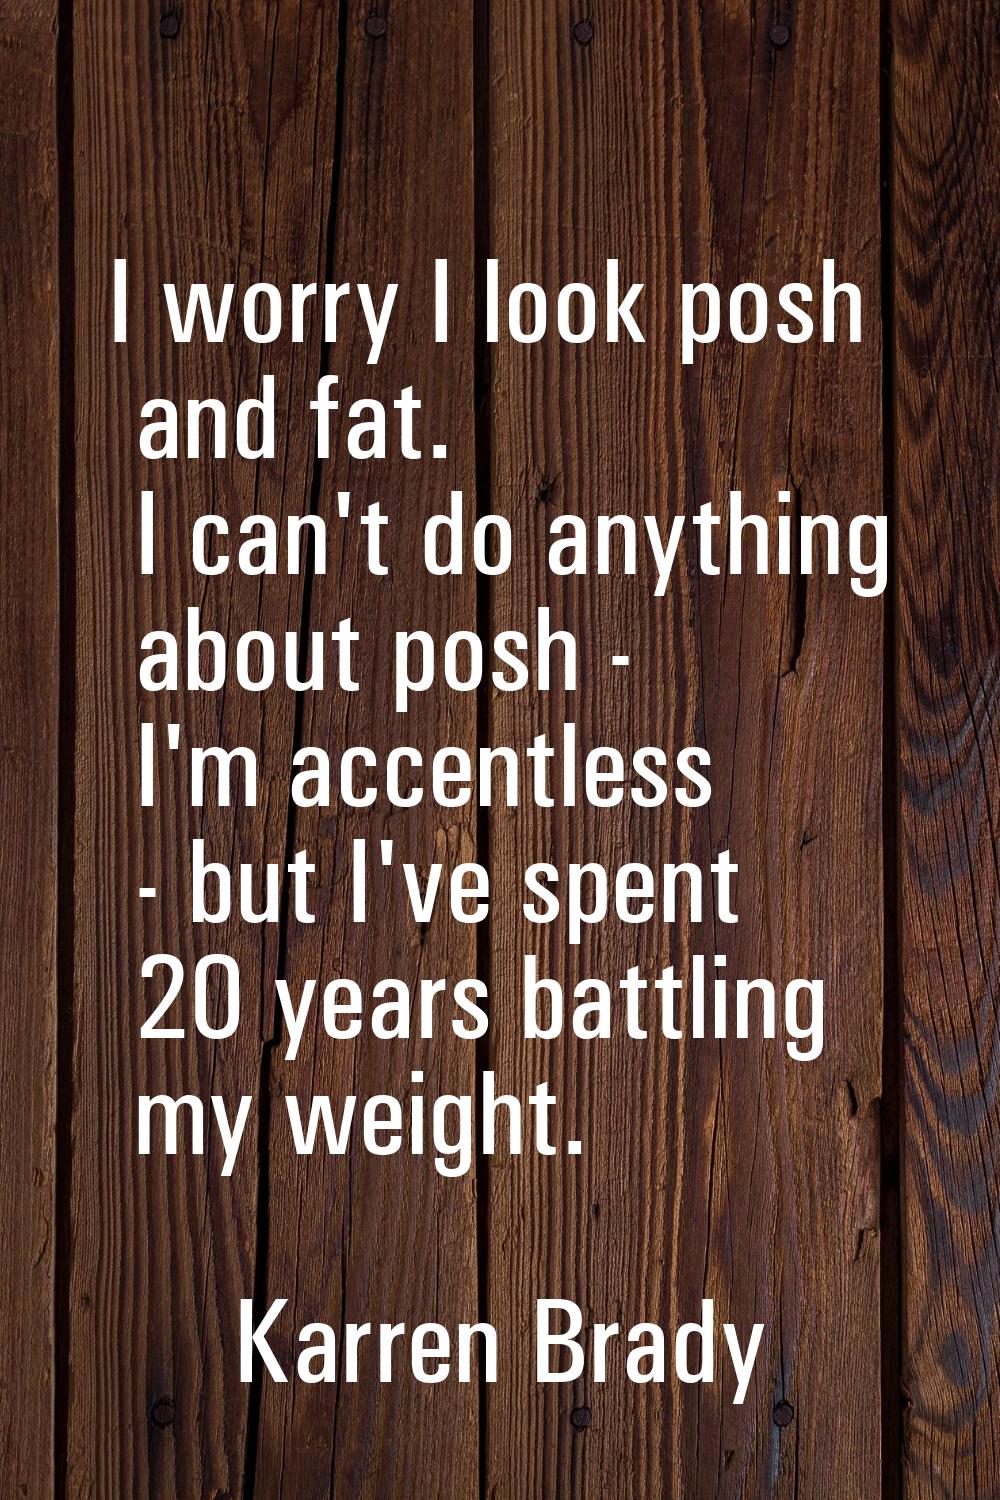 I worry I look posh and fat. I can't do anything about posh - I'm accentless - but I've spent 20 ye